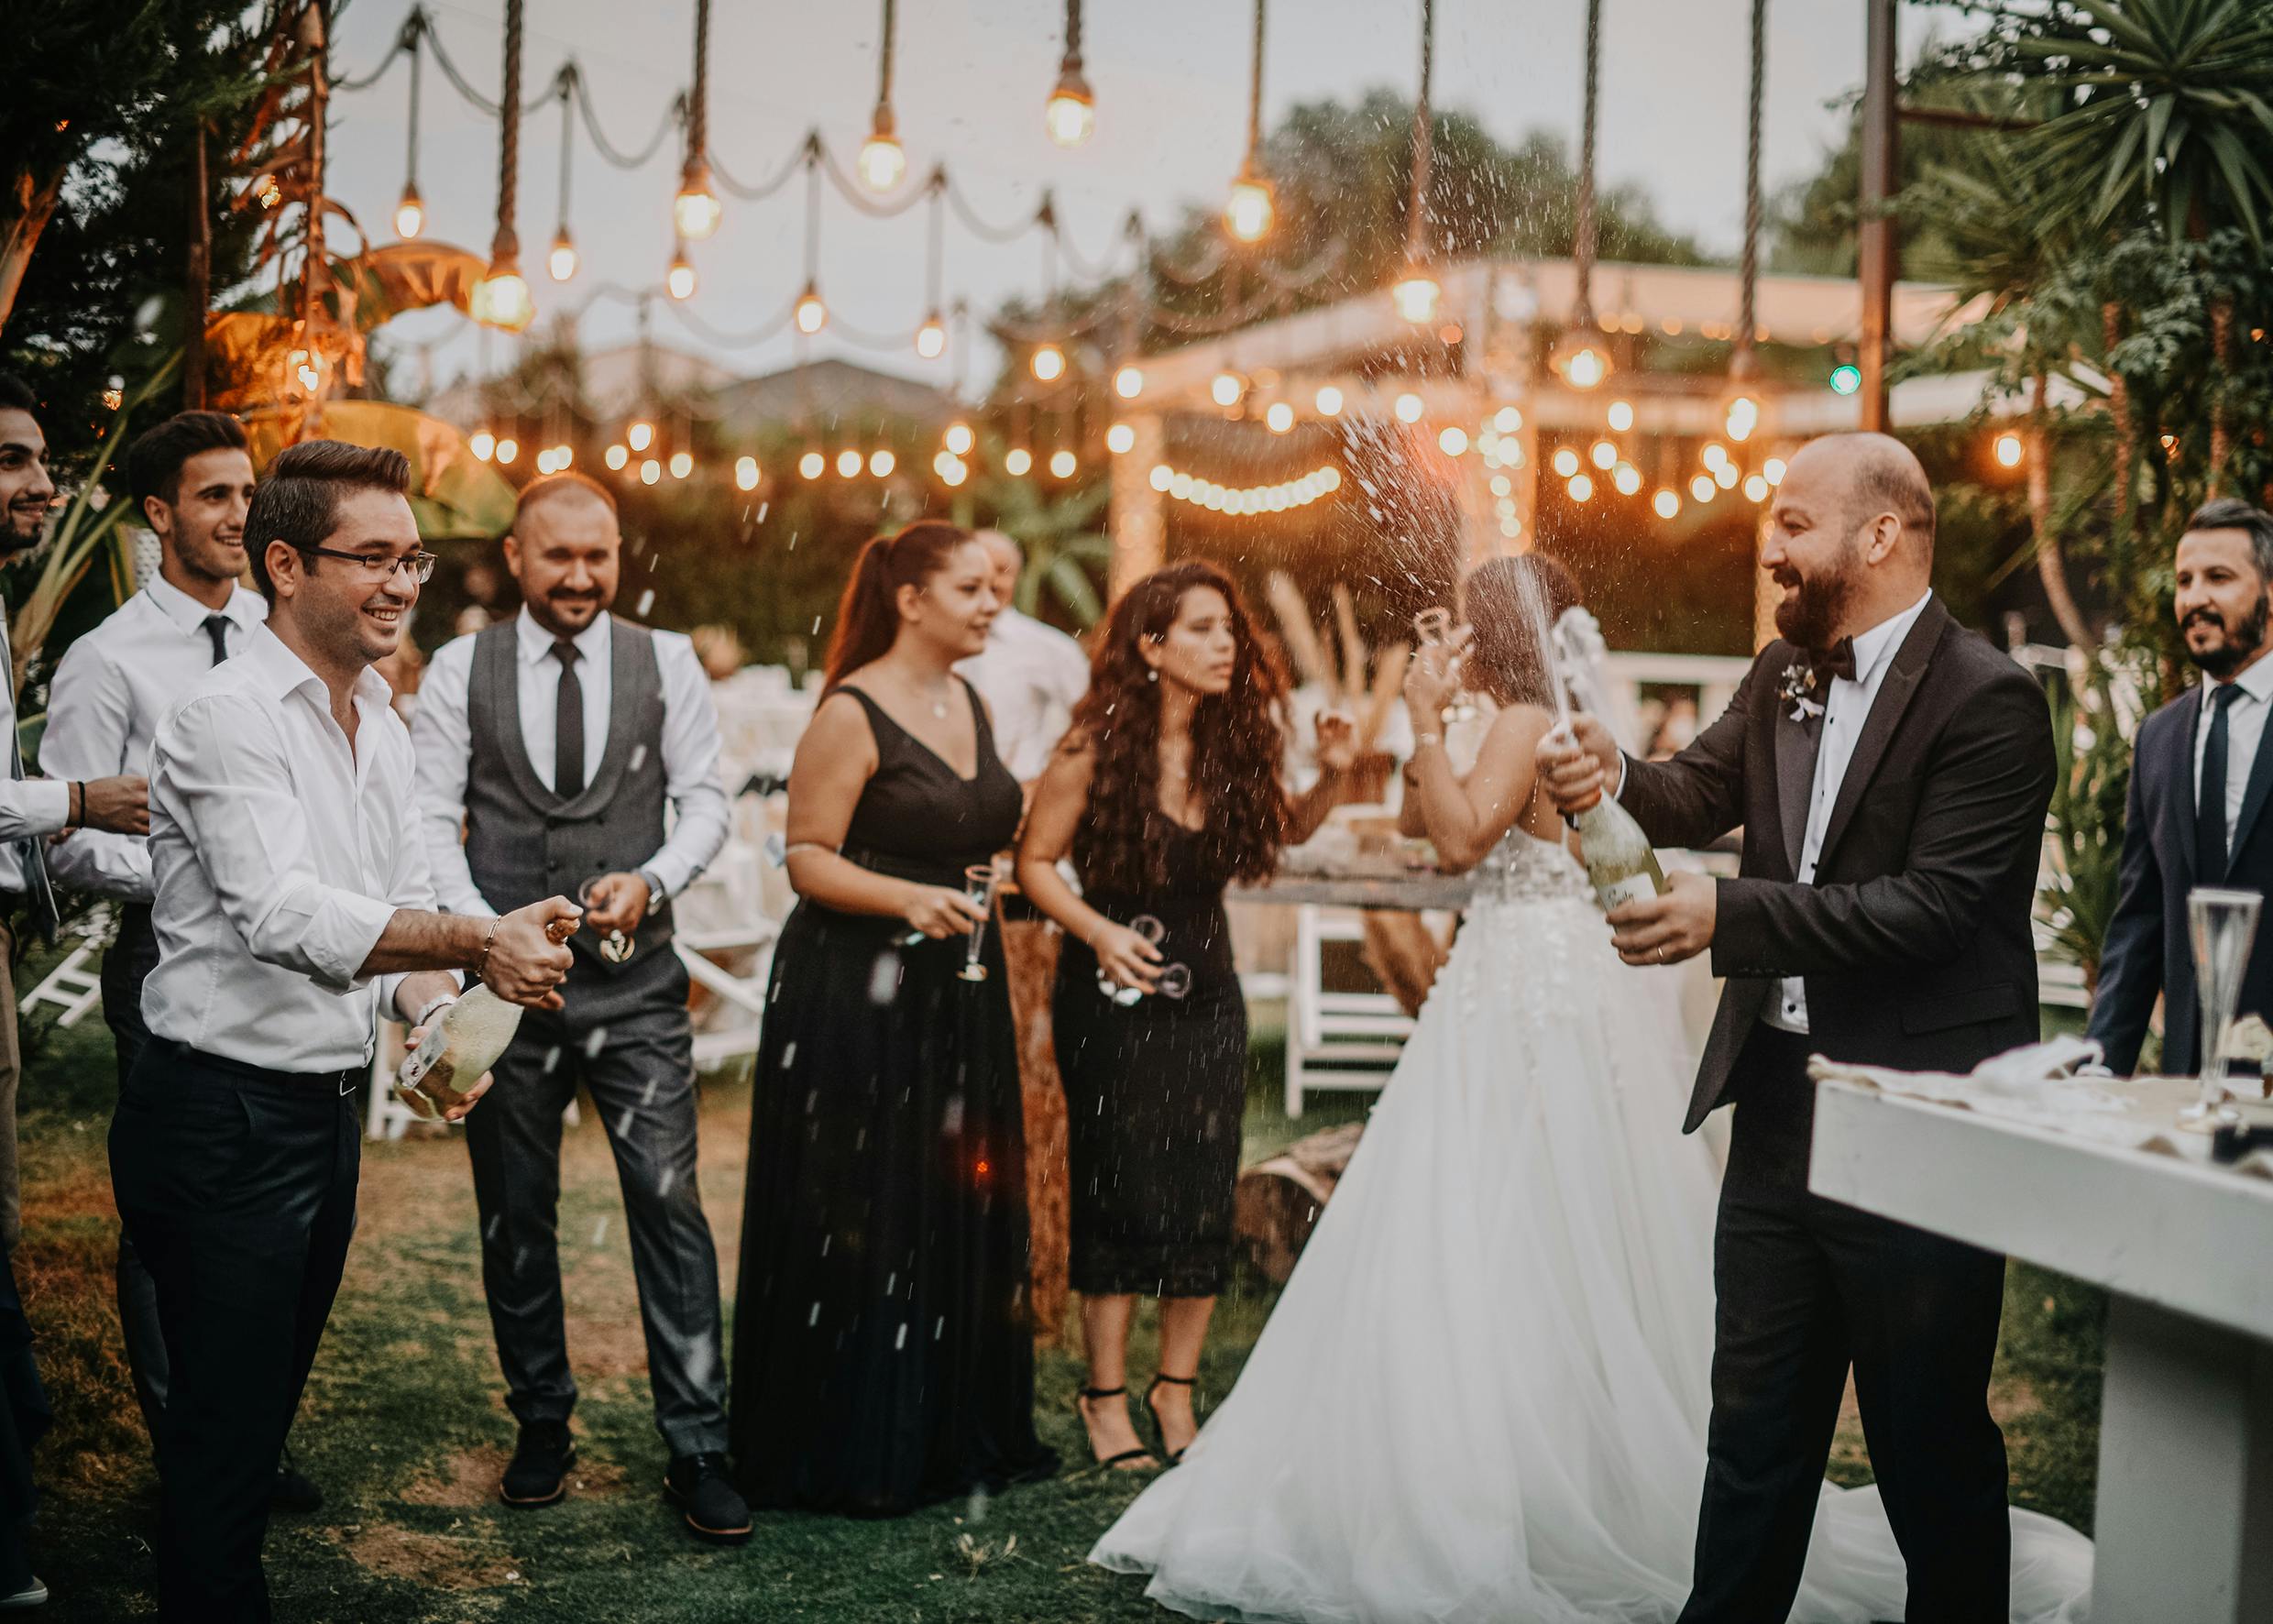 Bridal party at the wedding | Source: Pexels